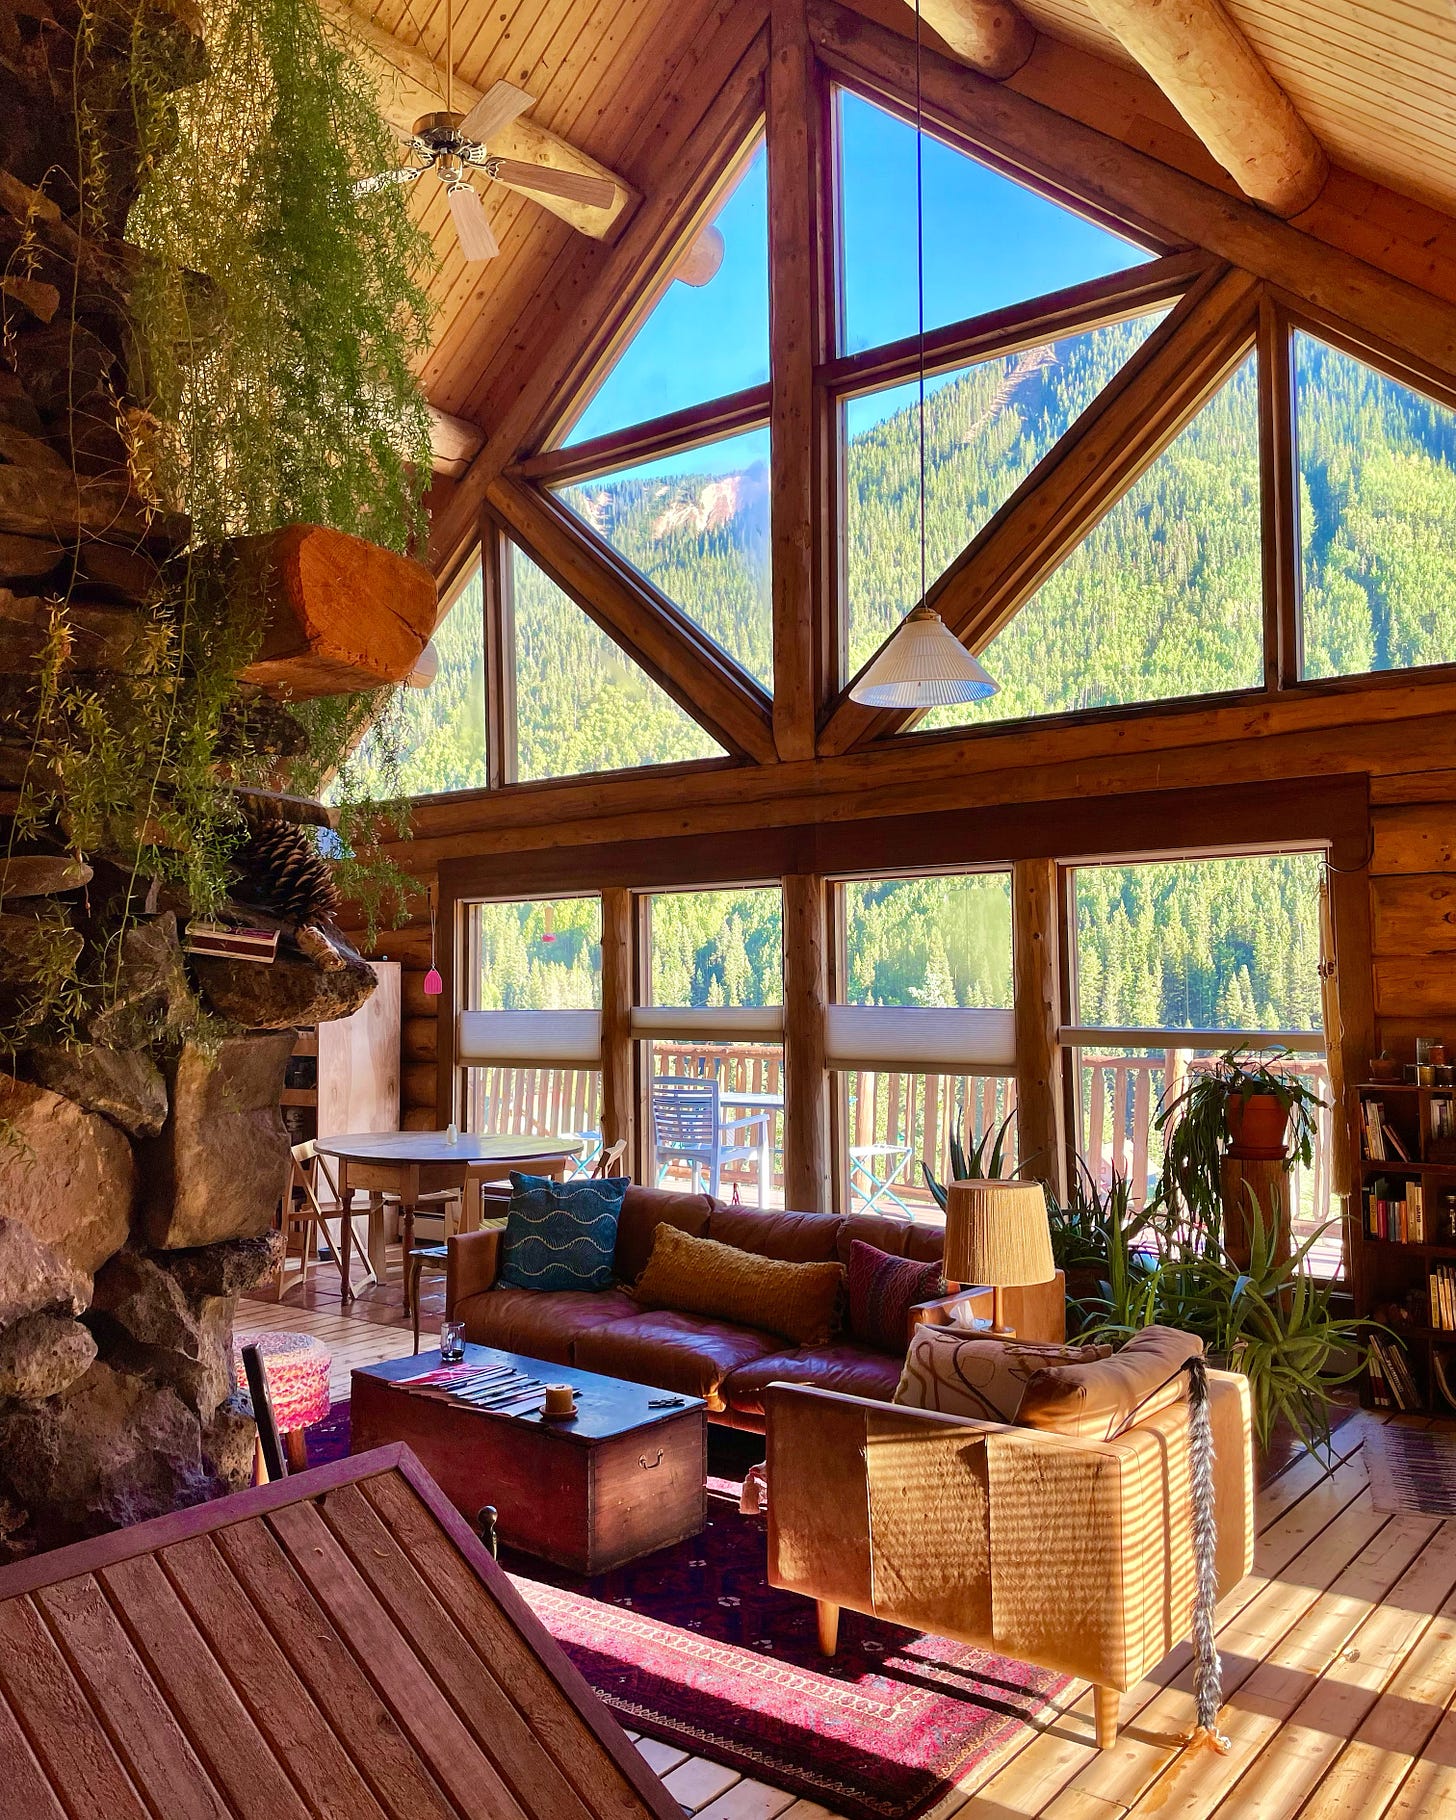 a cabin with a large window view of green trees and a mountain ridge line